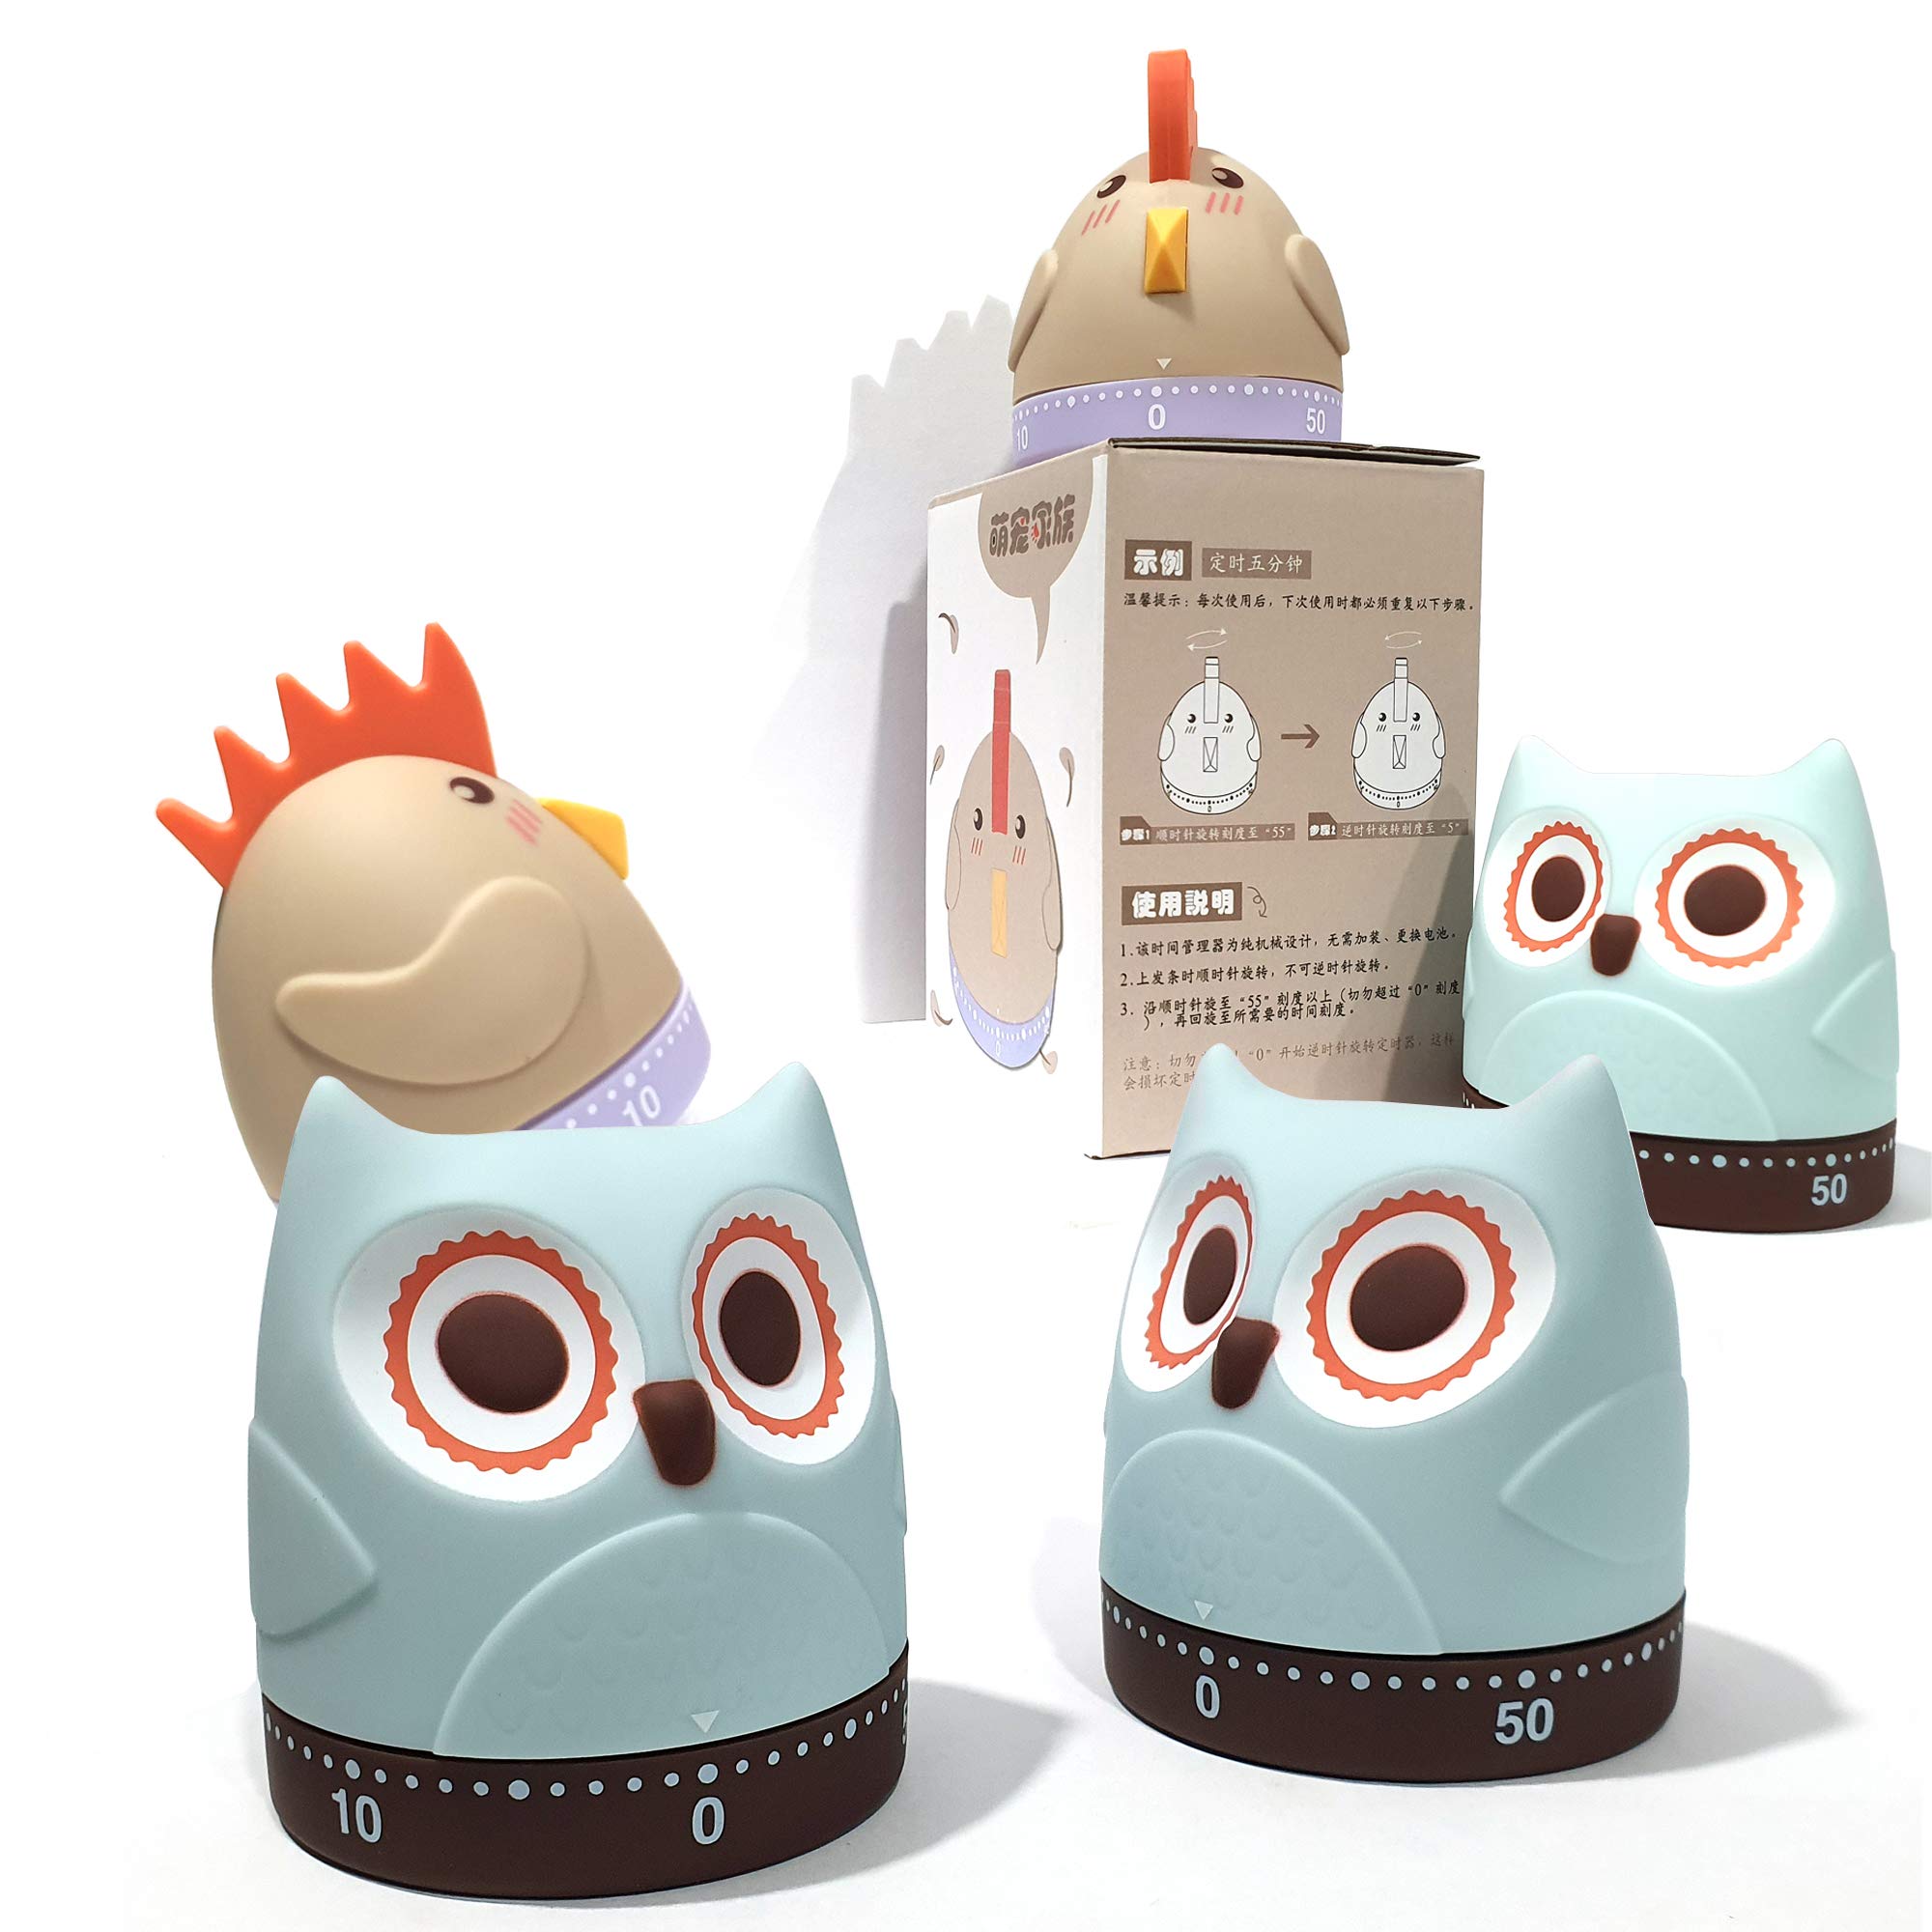 Cartoon Owl Chick Mechanical Timers 60 Minutes Kitchen Cooking Timer Clock Loud Alarm Counters Mini Size Manual No Batteries Required, 100% Mechanical - Magnetic Backing, Timer for Study. (Owl)